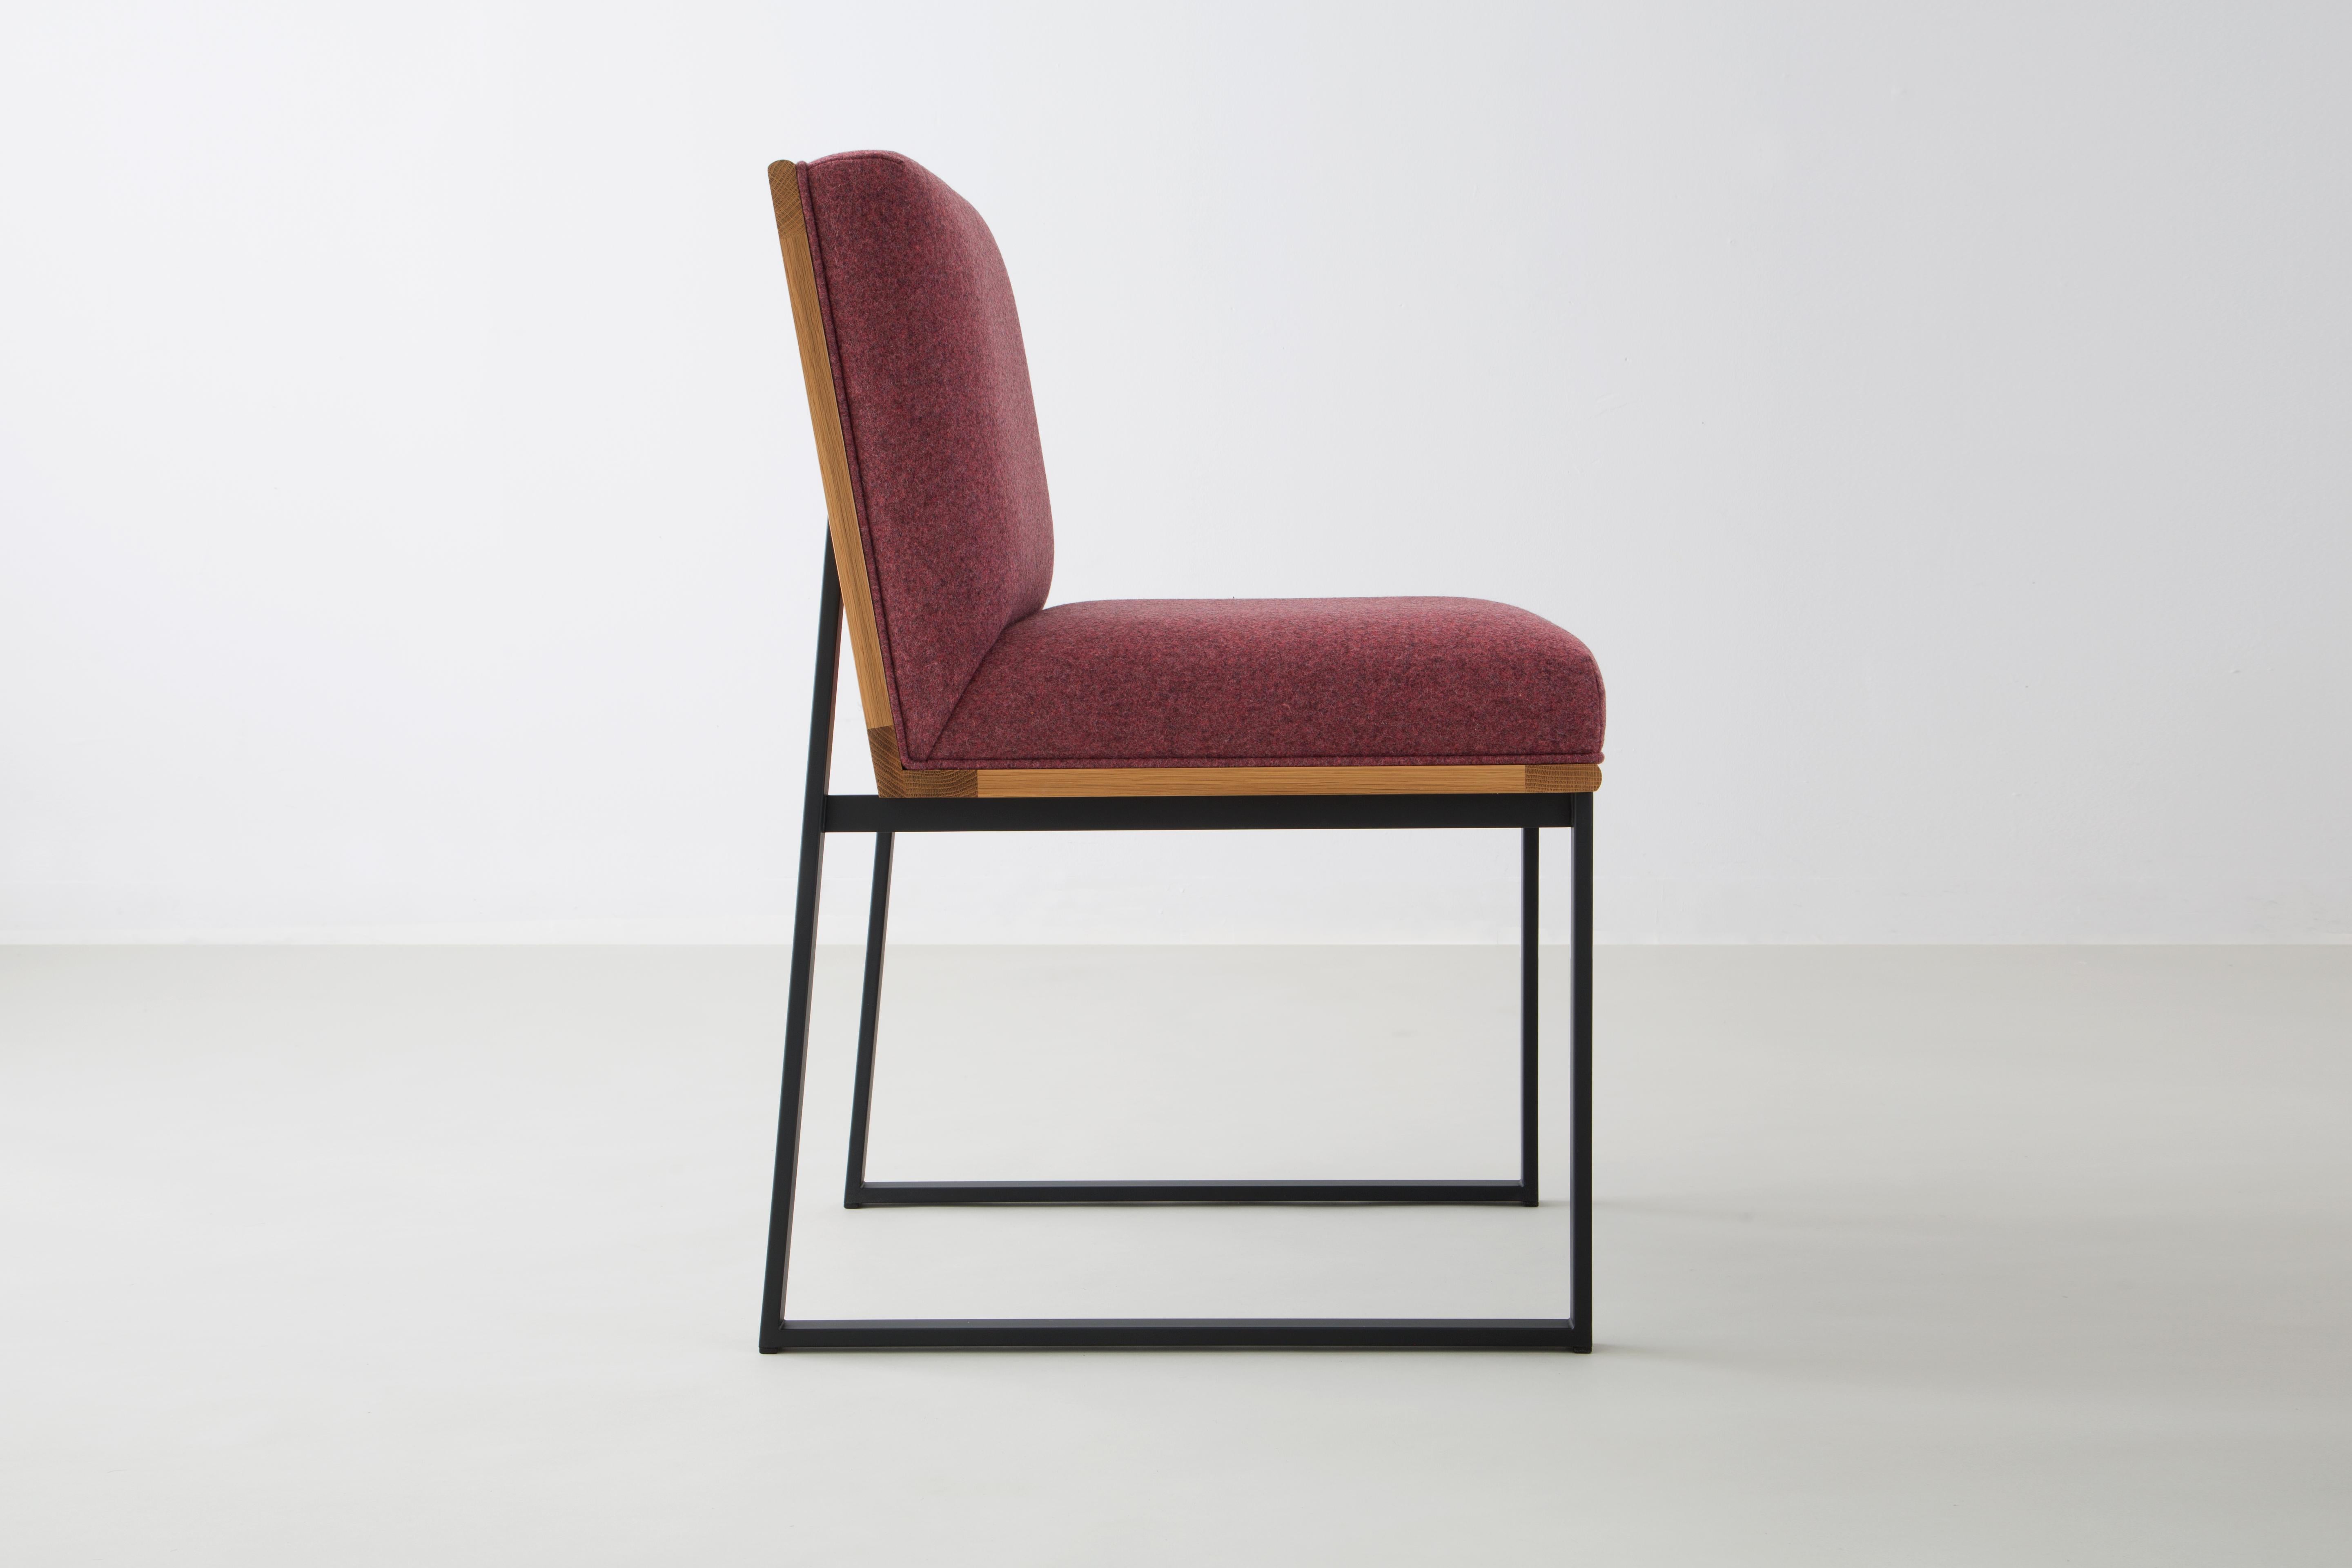 The DGD dining chair finds formality and comfort in the industrial and organic.
 
Powder coated steel frame shown in black and available in any standard RAL colors.

Shown in white oak and Divina MD wool felt by Kvadrat. 

Available with:

Wood in